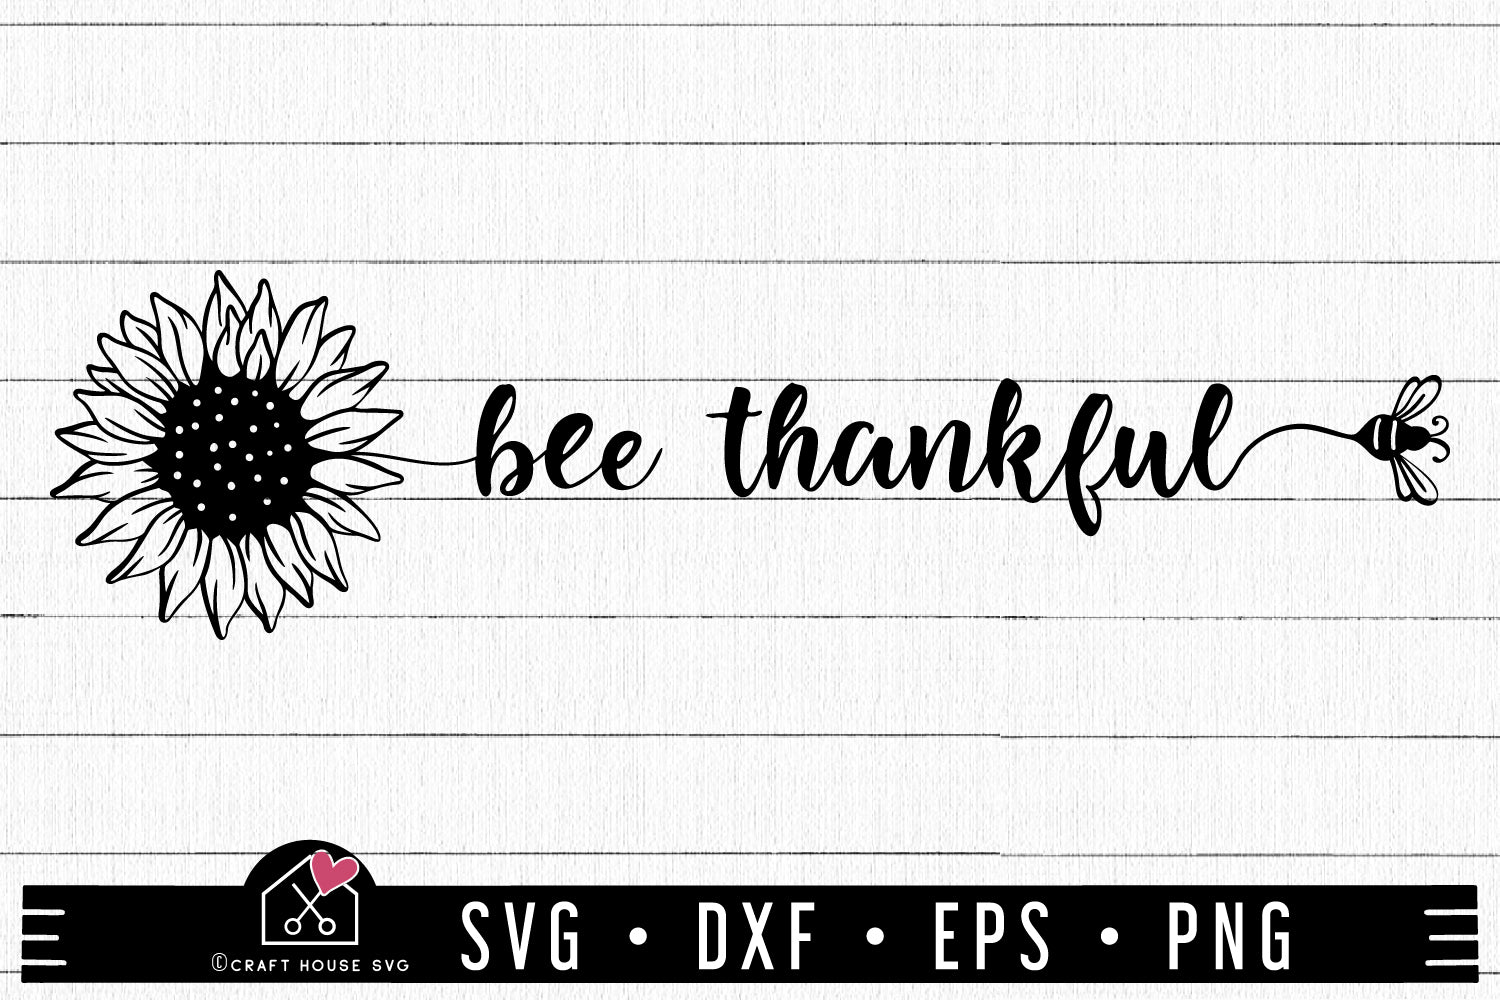 Bee Thankful SVG Sunflower Quote Cut File